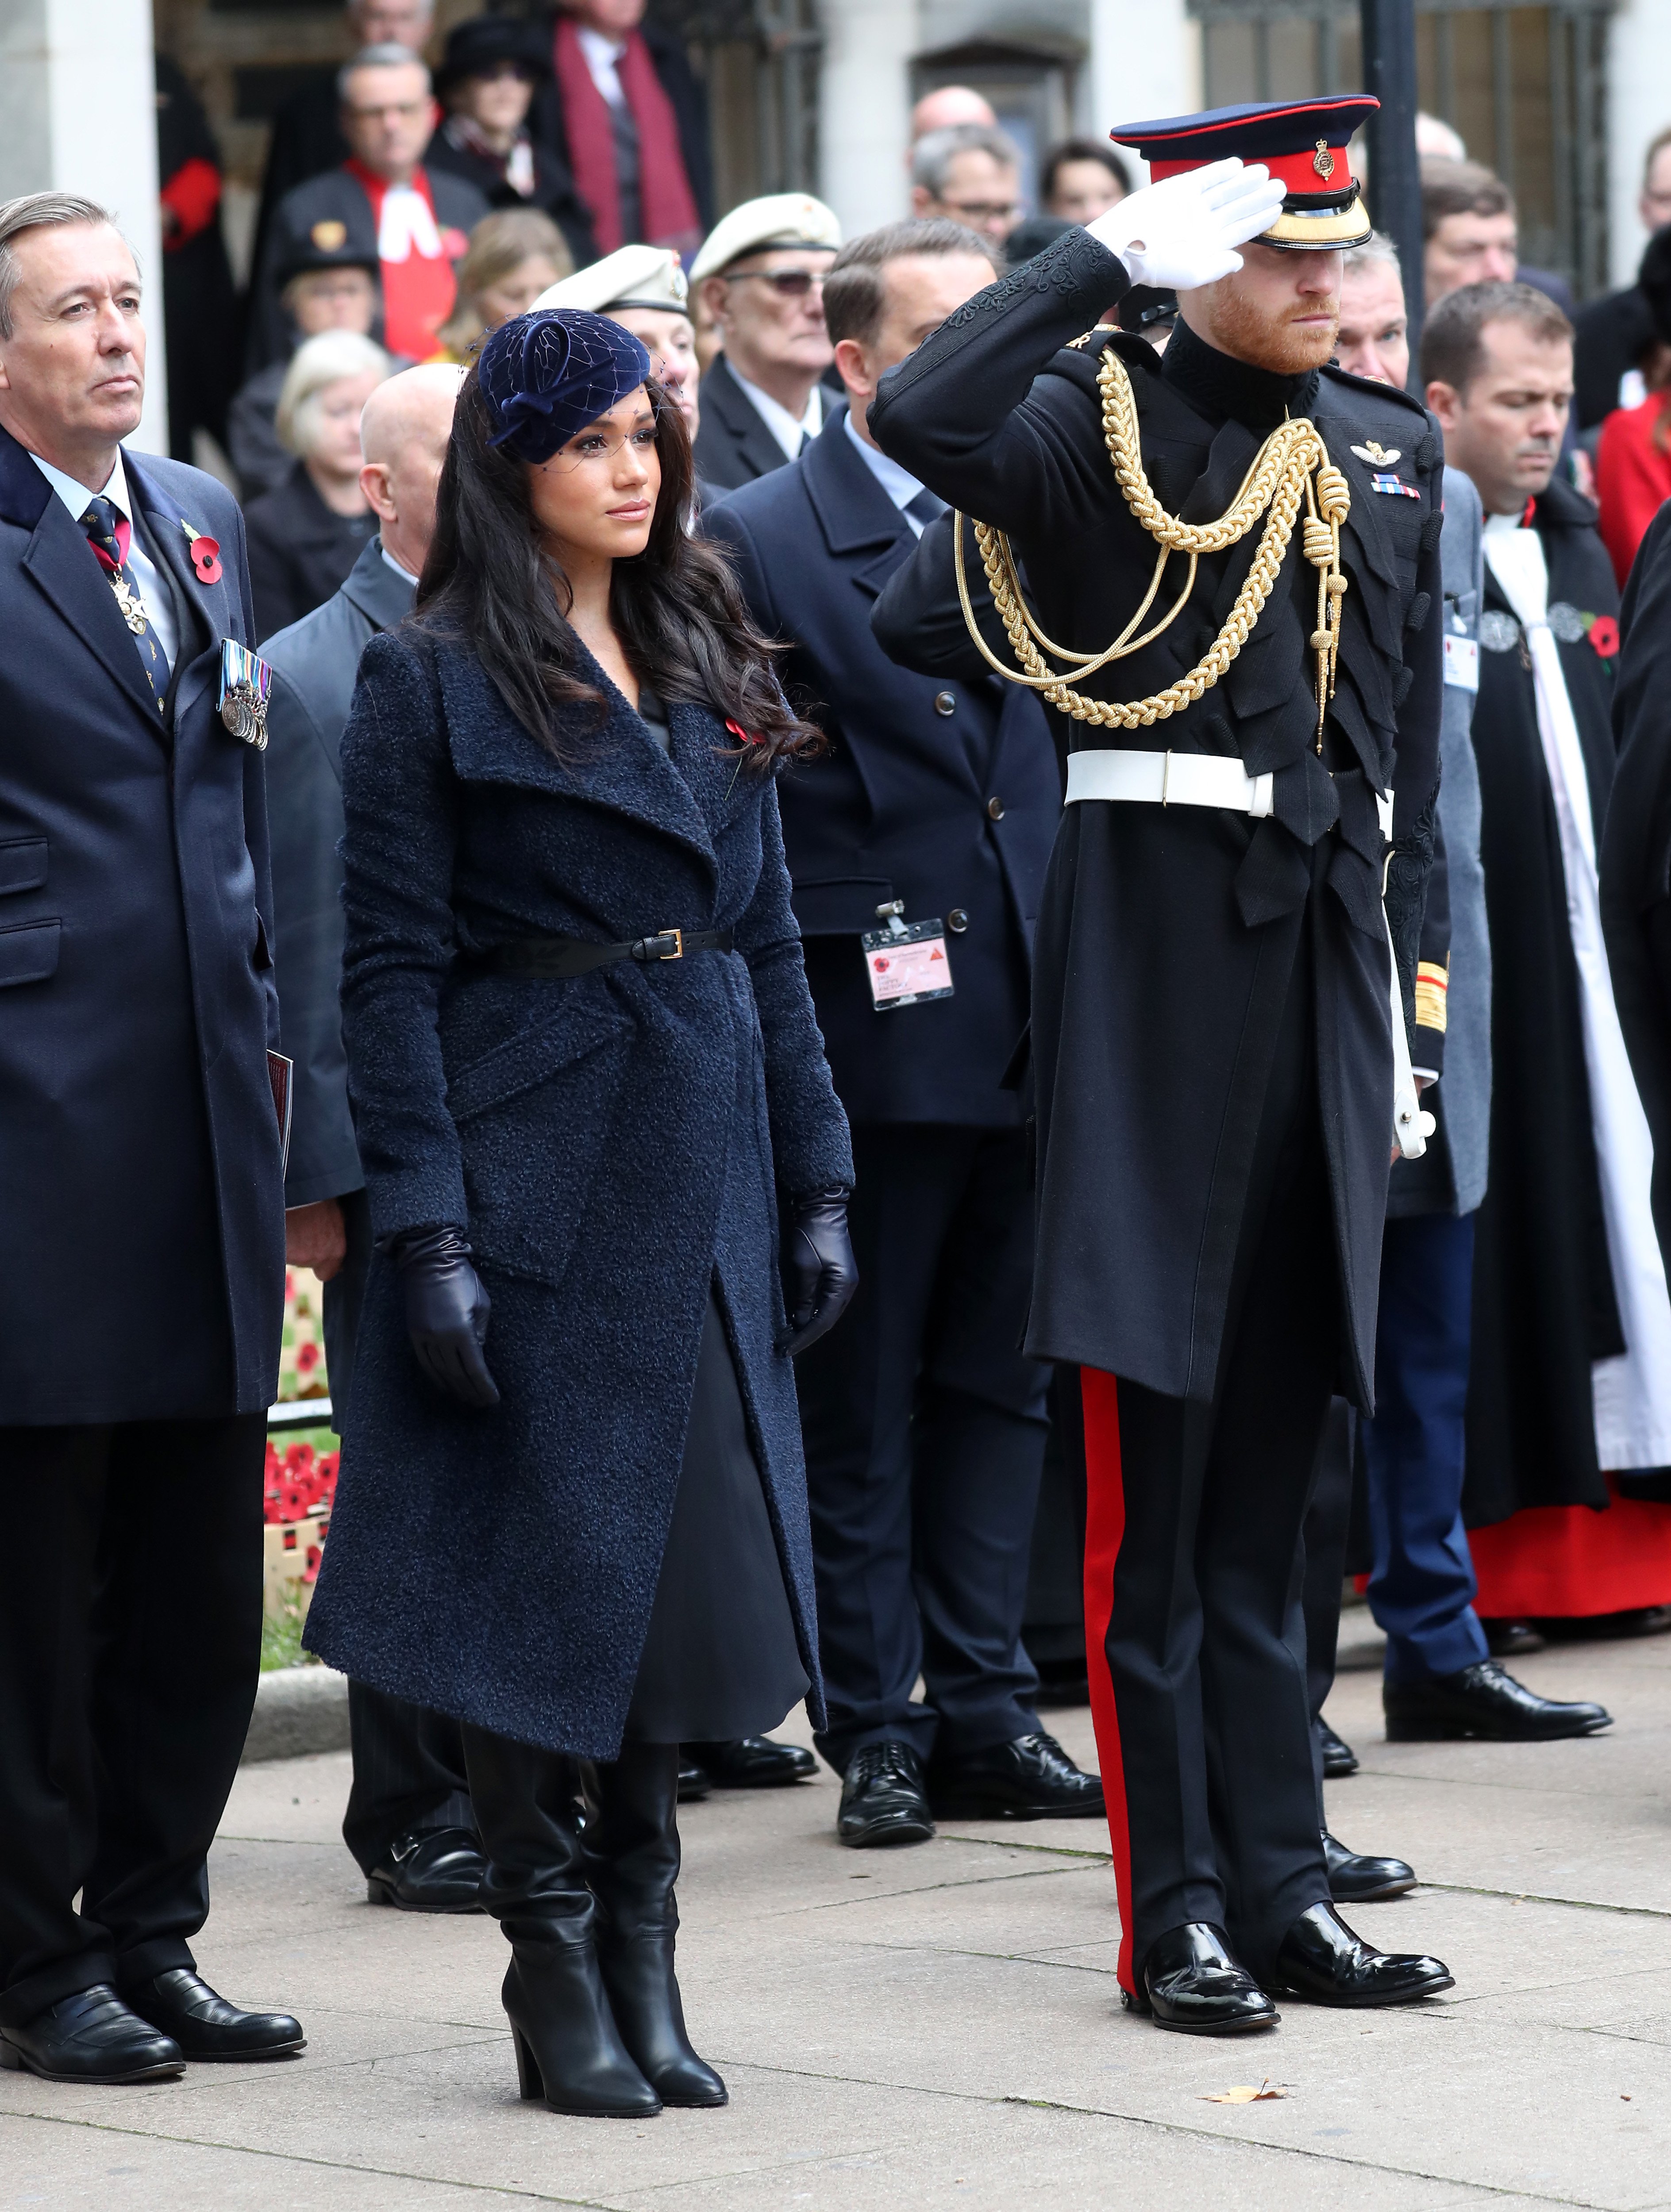 Meghan Markle and Prince Harry attend the 91st Field of Remembrance at Westminster Abbey on November 07, 2019, in London, England. | Source: Getty Images.